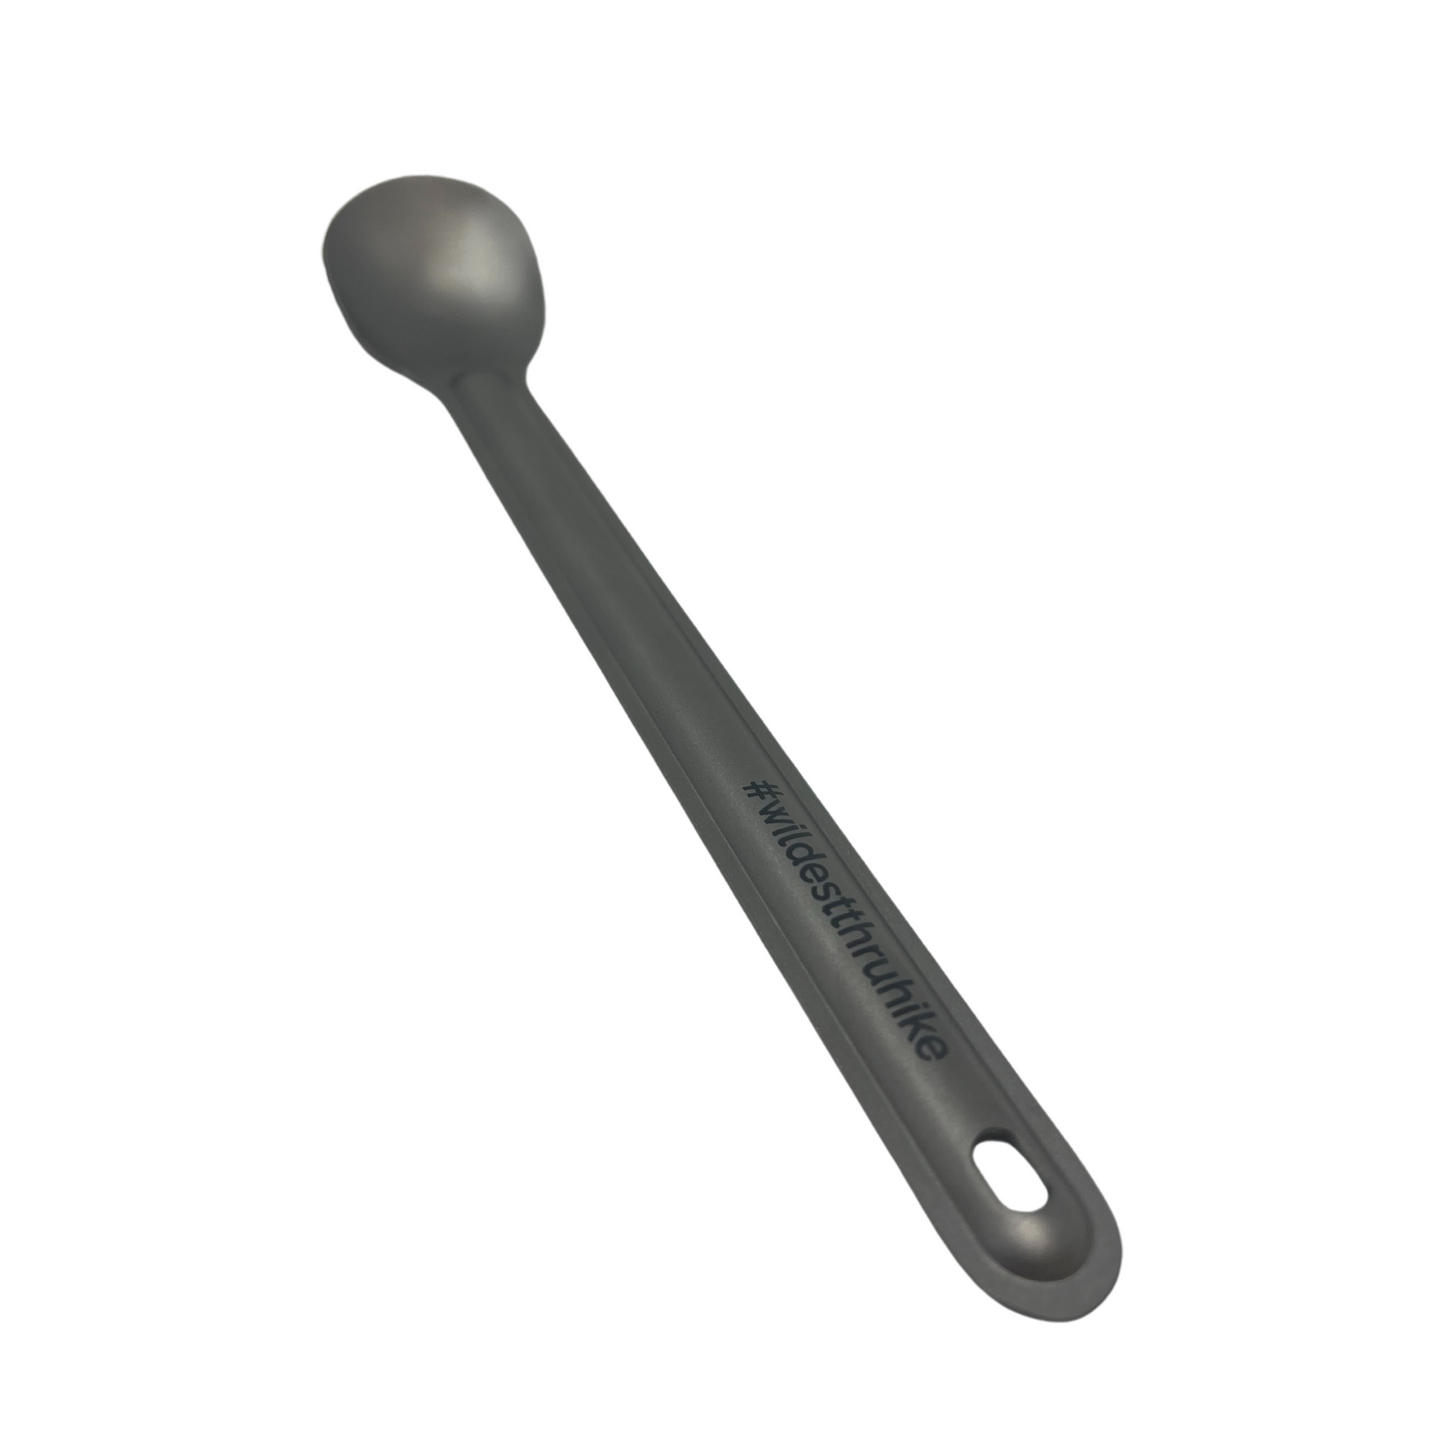 The Great Divide Trail Association - Titanium Extra Long Spoon